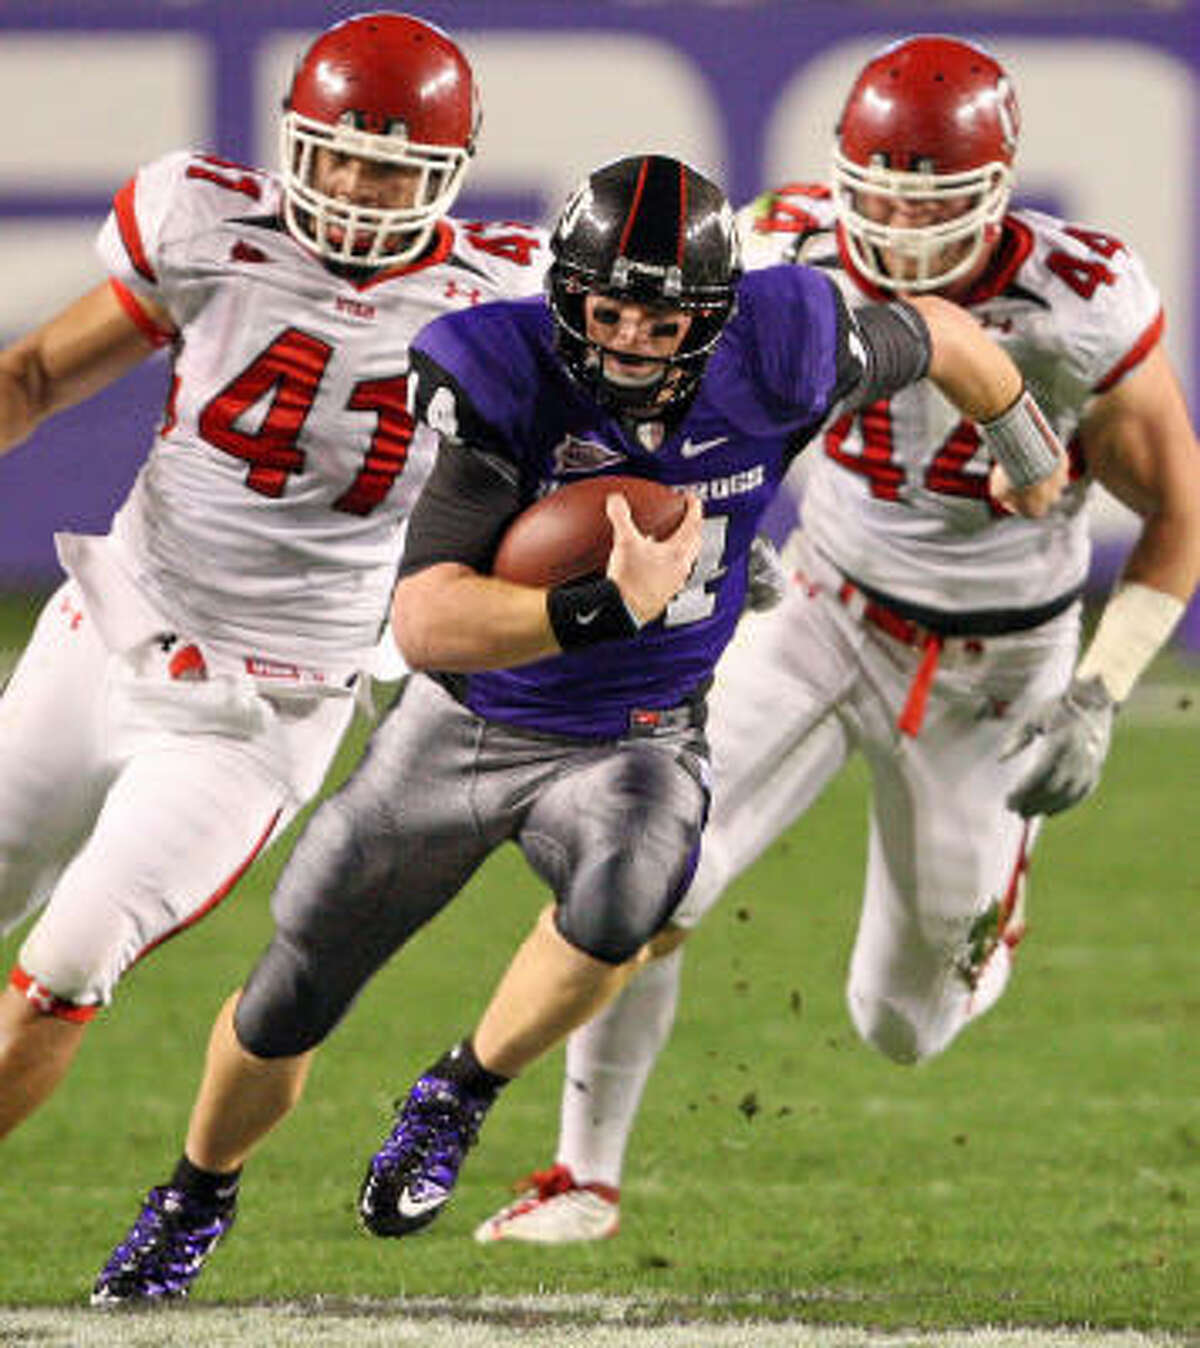 Texas Christian quarterback Andy Dalton (14) out runs Utah defenders Koa Misi (41) and Dave Kruger (44) in the first half of play at Amon G. Carter Stadium on Saturday.